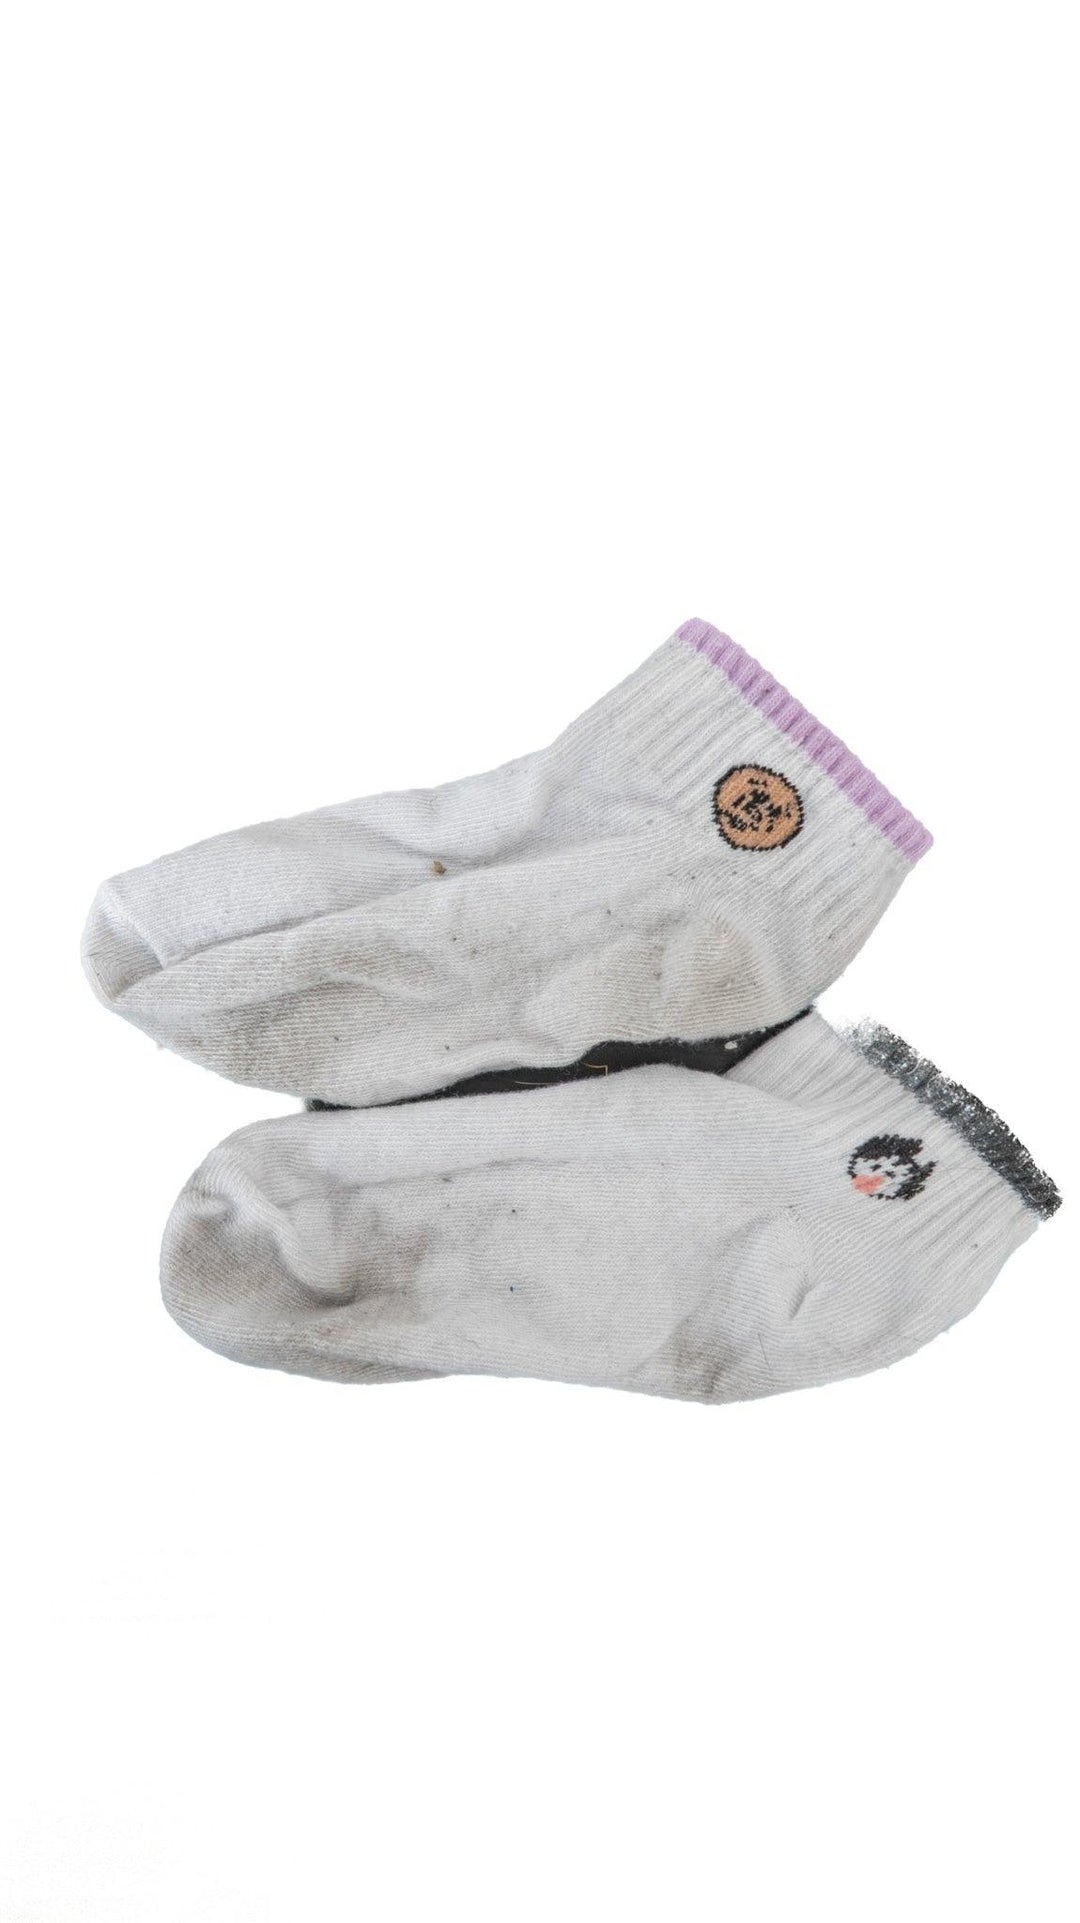 Anna Claire Clouds White Unmacthed Socks - FANS UTOPIA